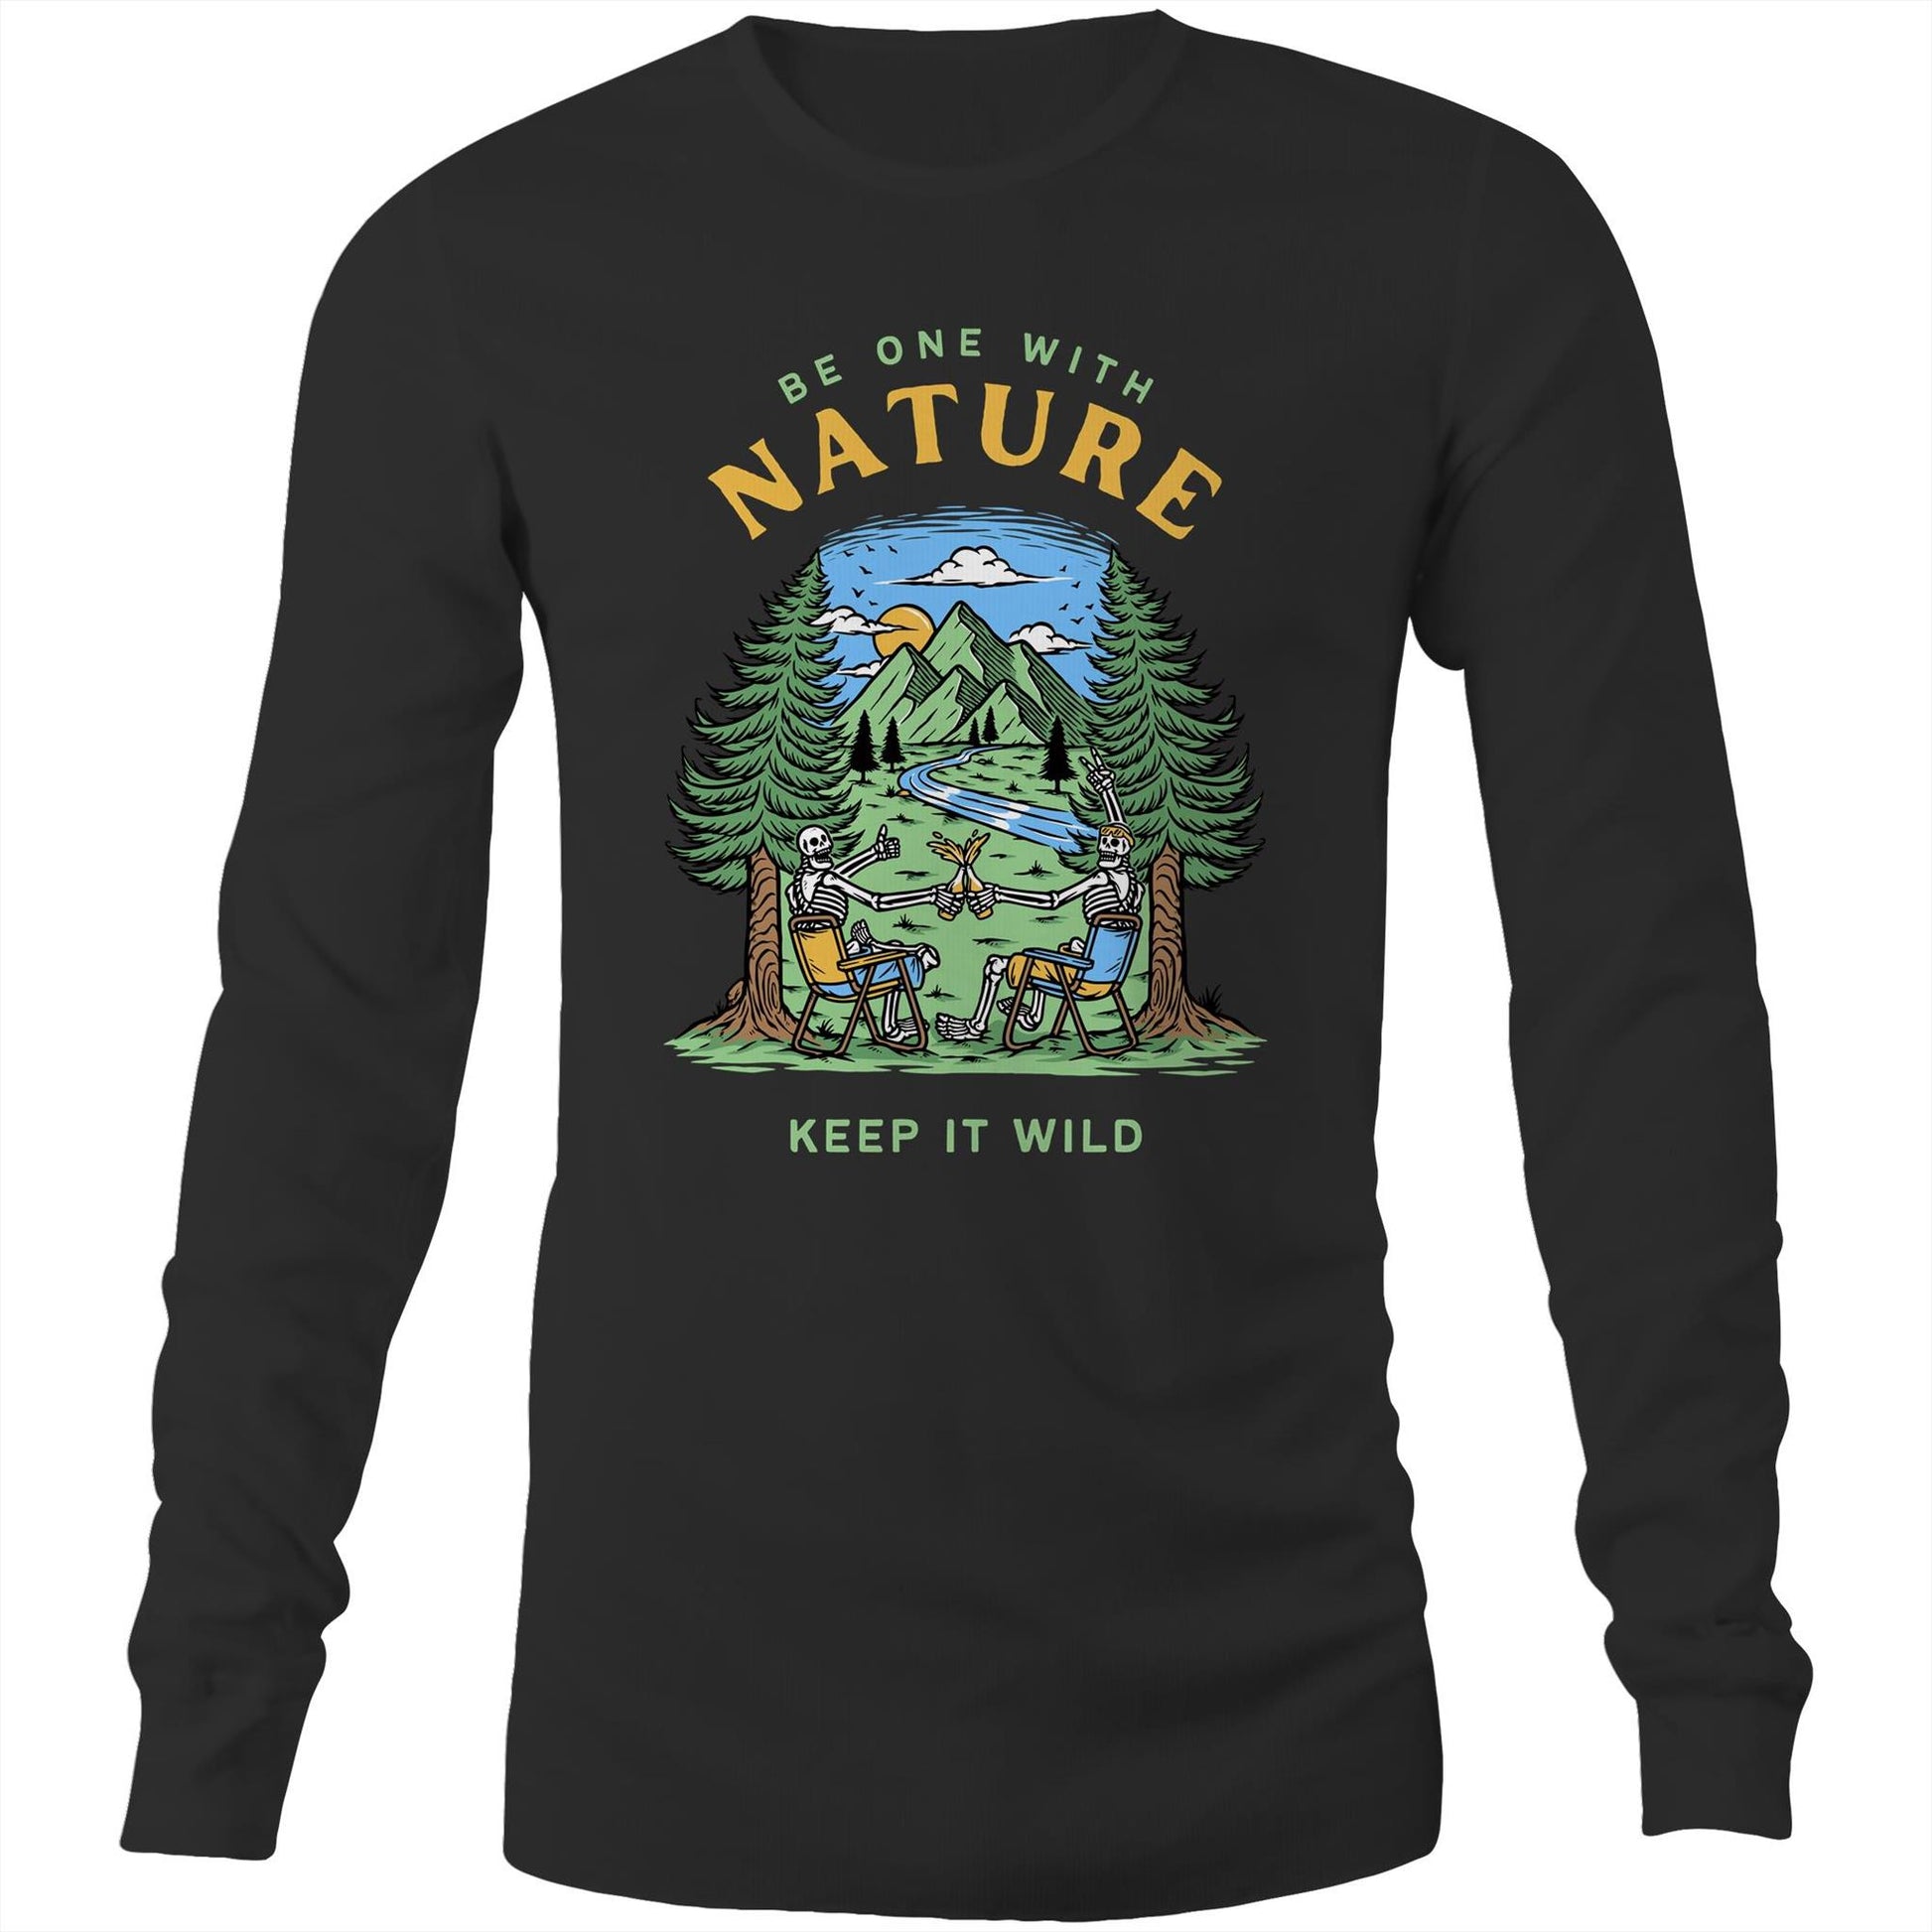 Be One With Nature, Skeleton - Long Sleeve T-Shirt Black Unisex Long Sleeve T-shirt Environment Summer